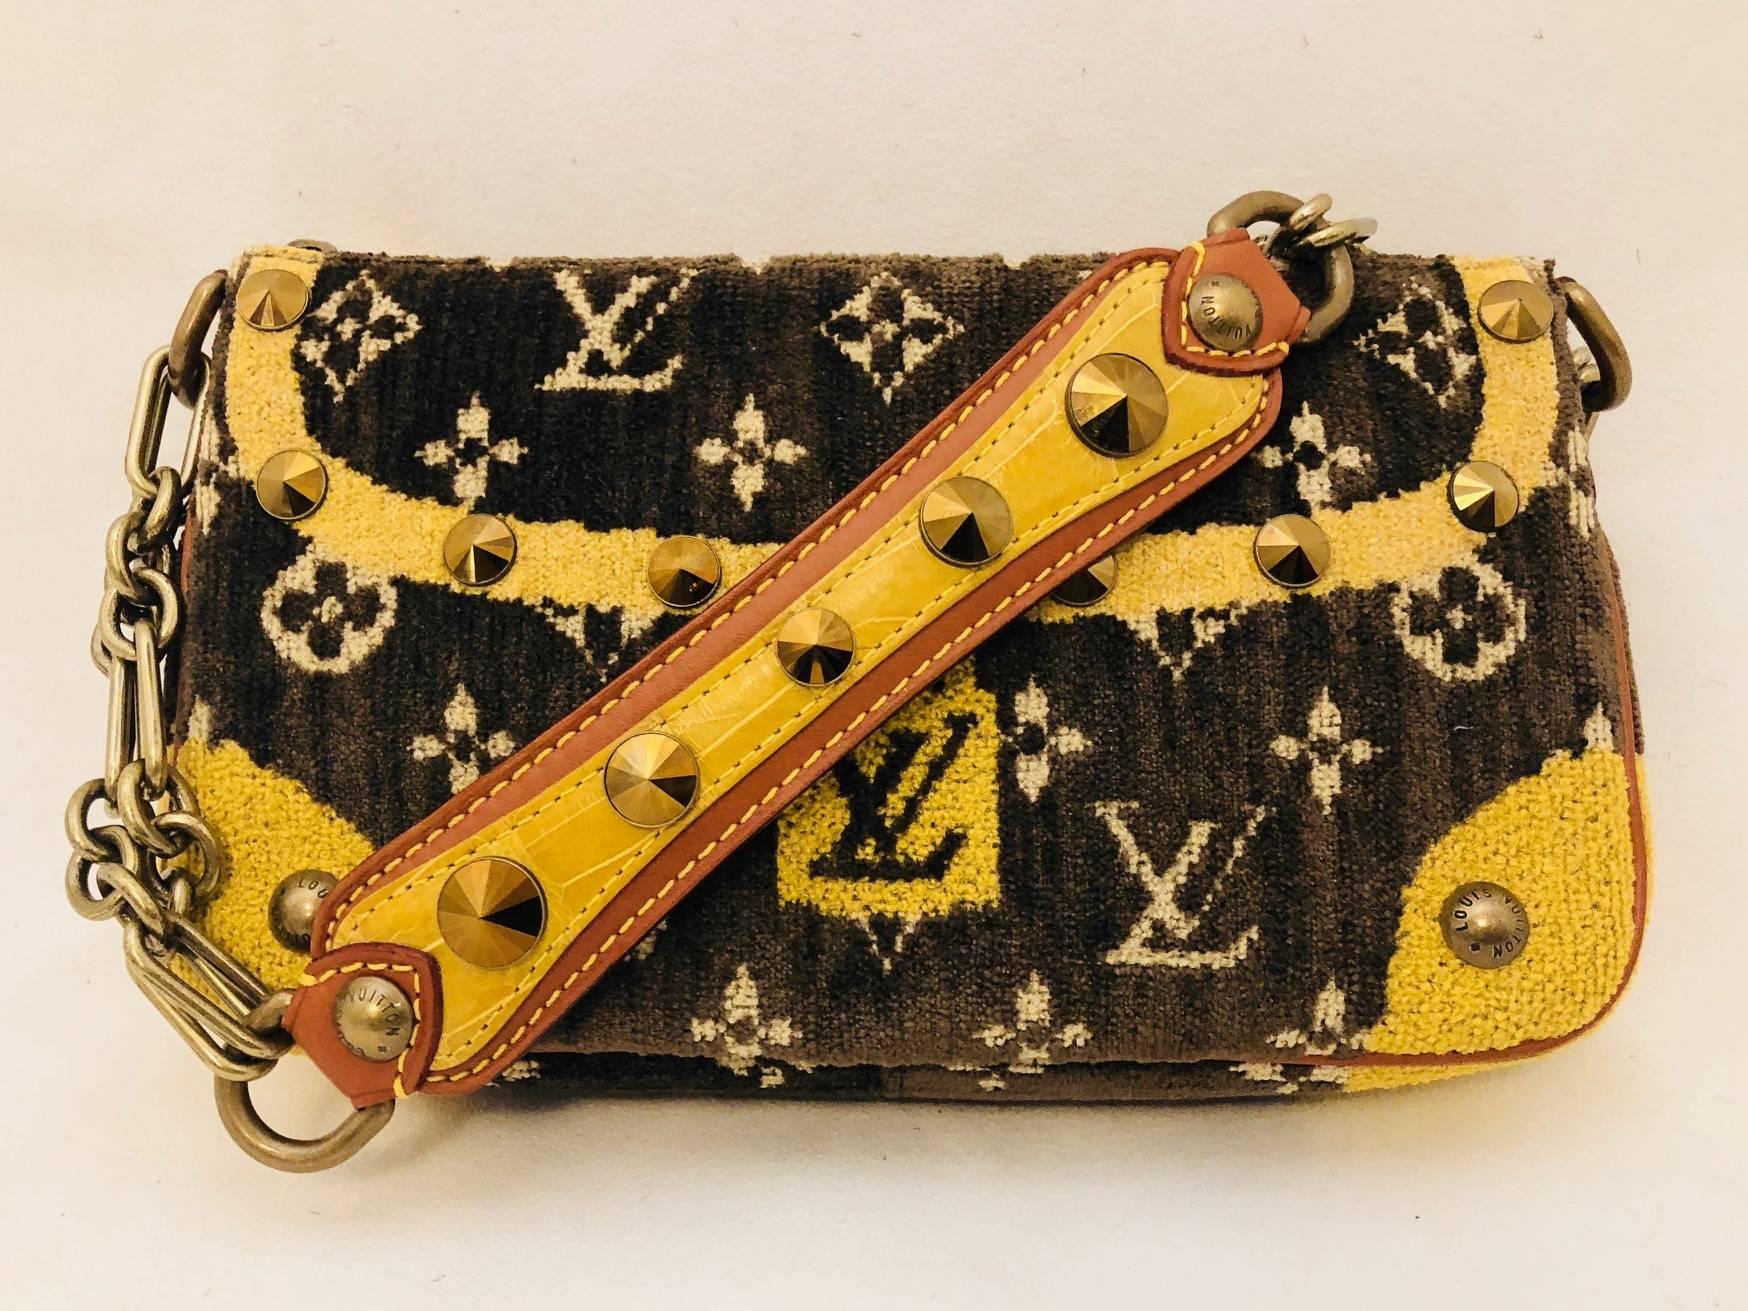 Limited Edition Louis Vuitton monogram pochette with a Trompe D'oeil design in brown and beige will have you taking a second look!  This bag has a velvet monogram exterior trimmed with dark tan leather piping on the edges and not metal studs but